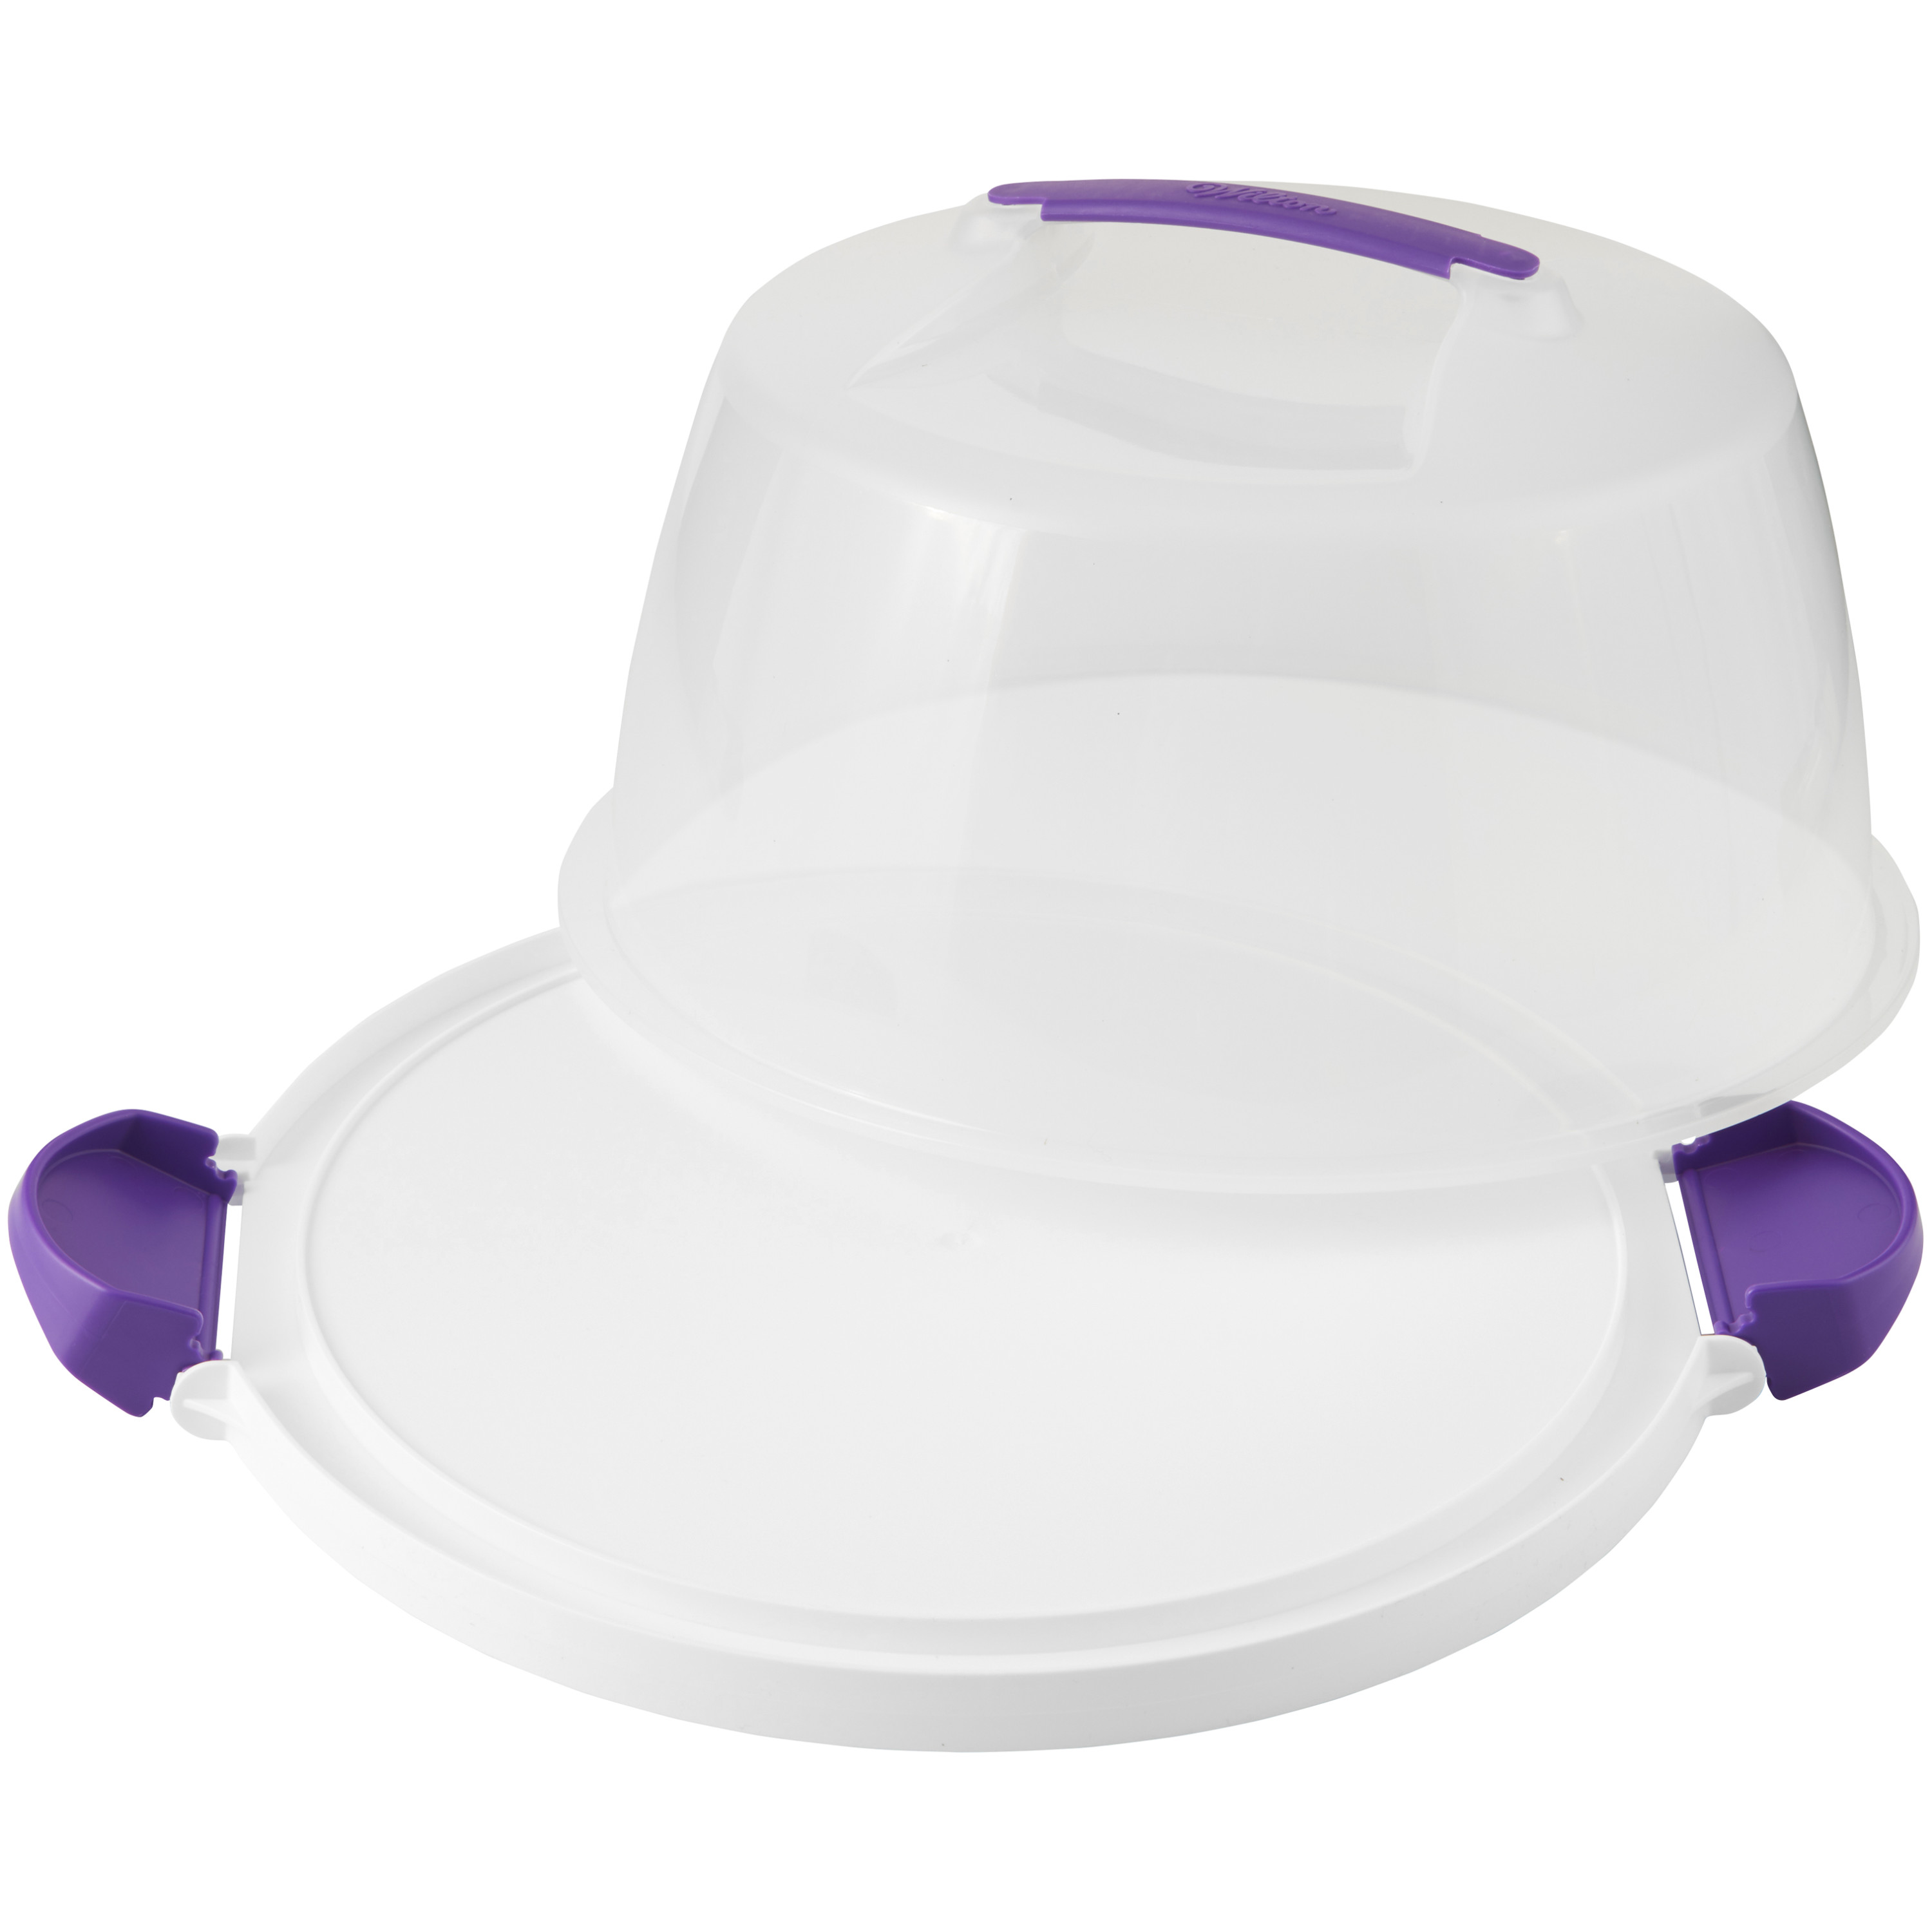 Wilton Cake and Cupcake Carrier, Fits 10 inch Cake or 13 Standard Cupcakes, 2.07 oz. - image 3 of 5